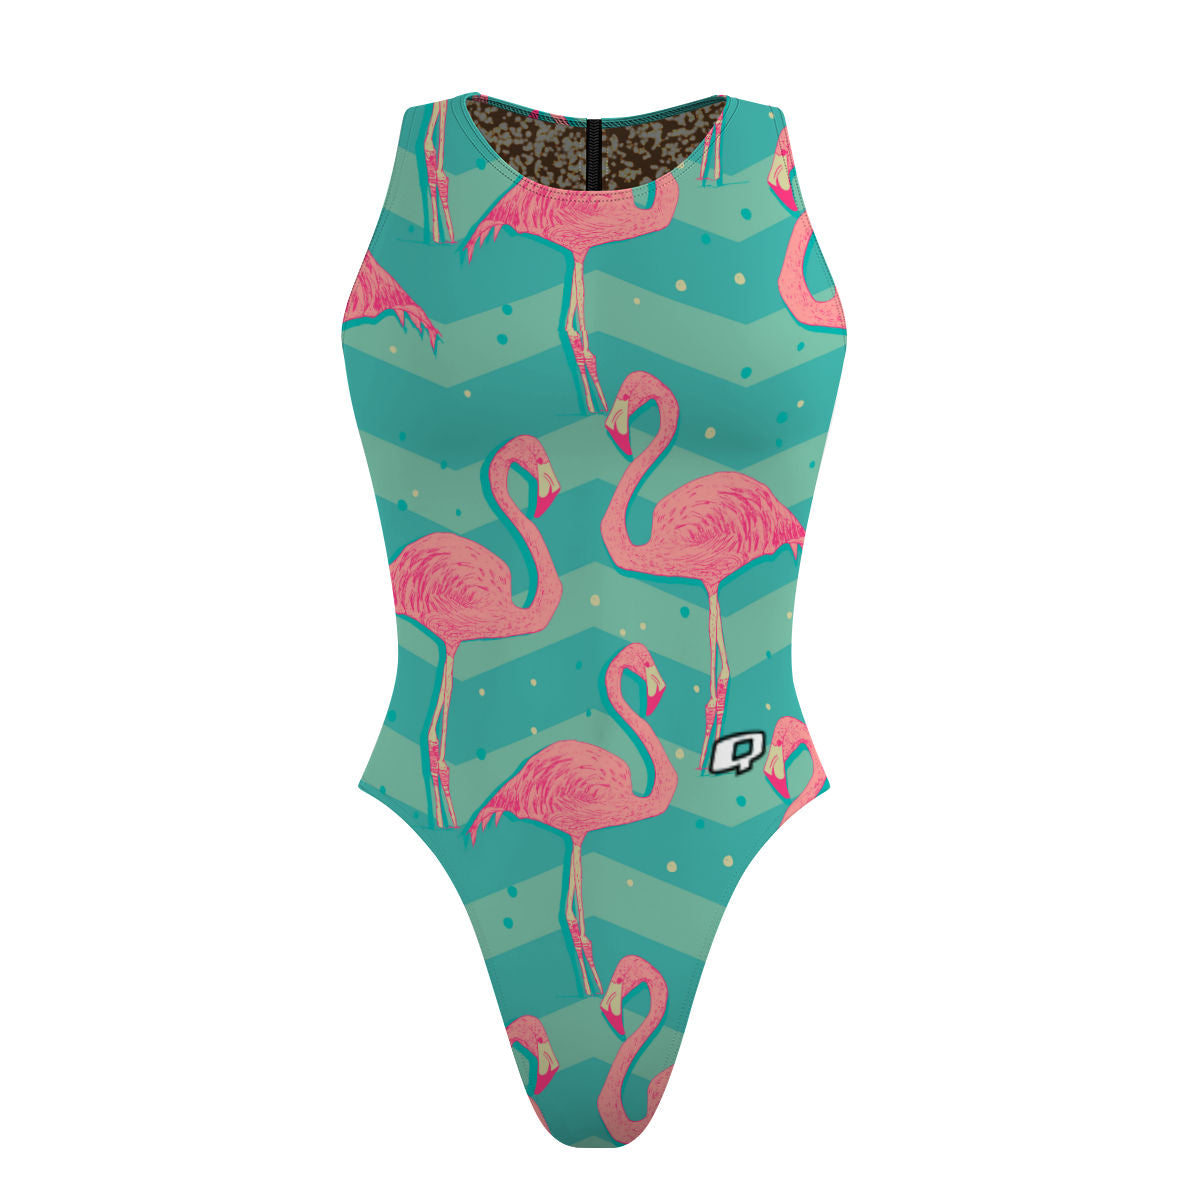 All that Glitters/Flock of Flamingos - Women Waterpolo Reversible Swimsuit Cheeky Cut